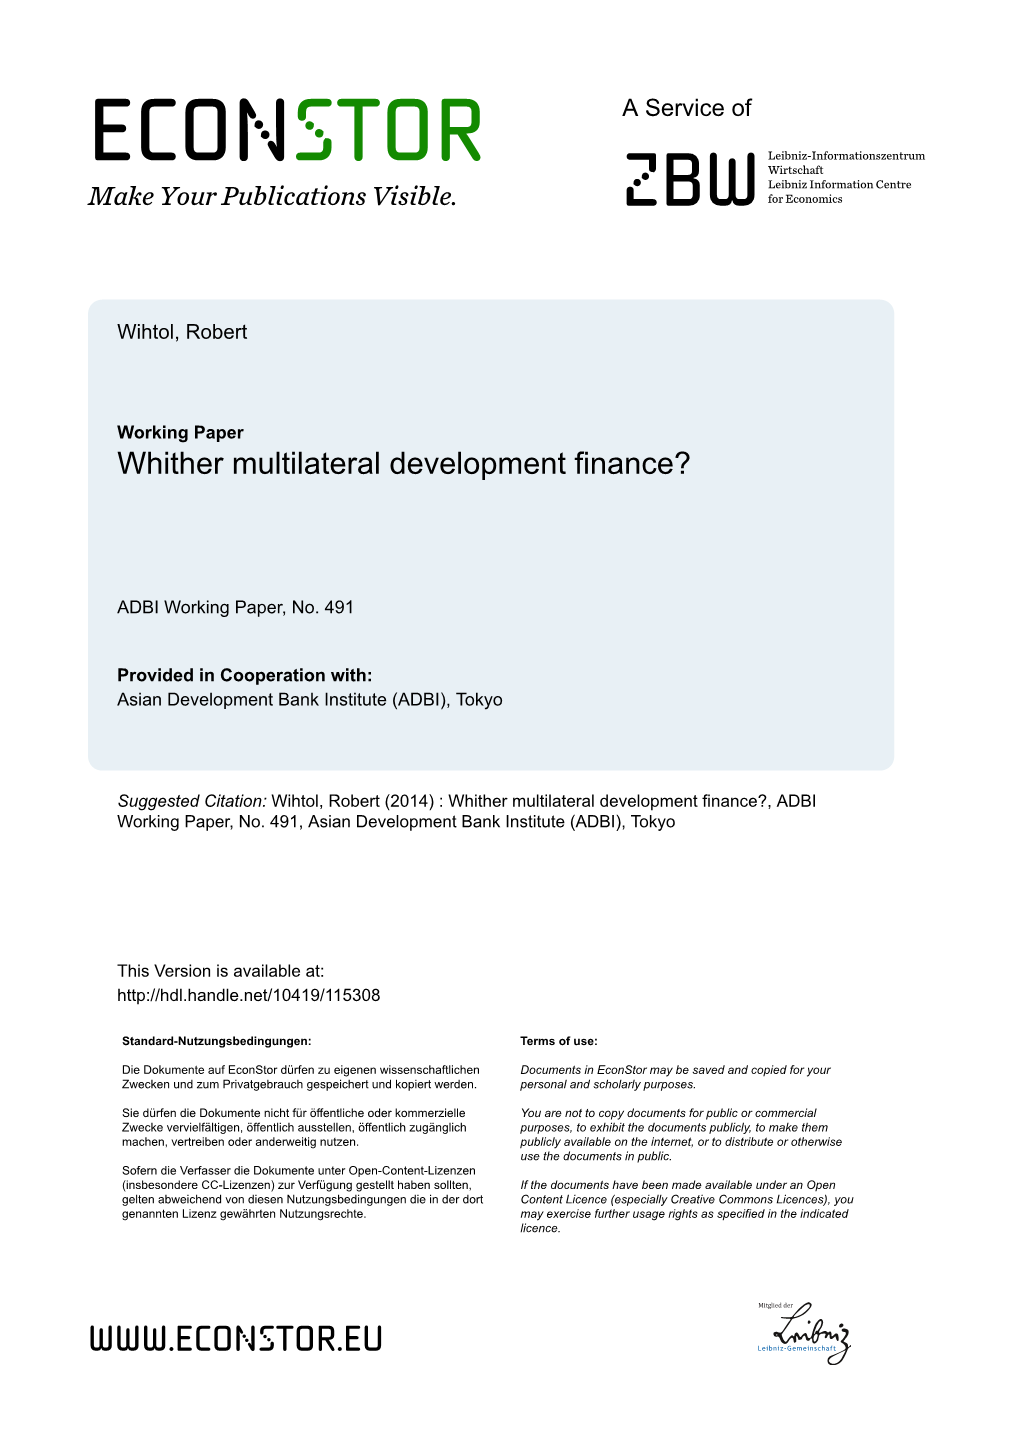 Whither Multilateral Development Finance?